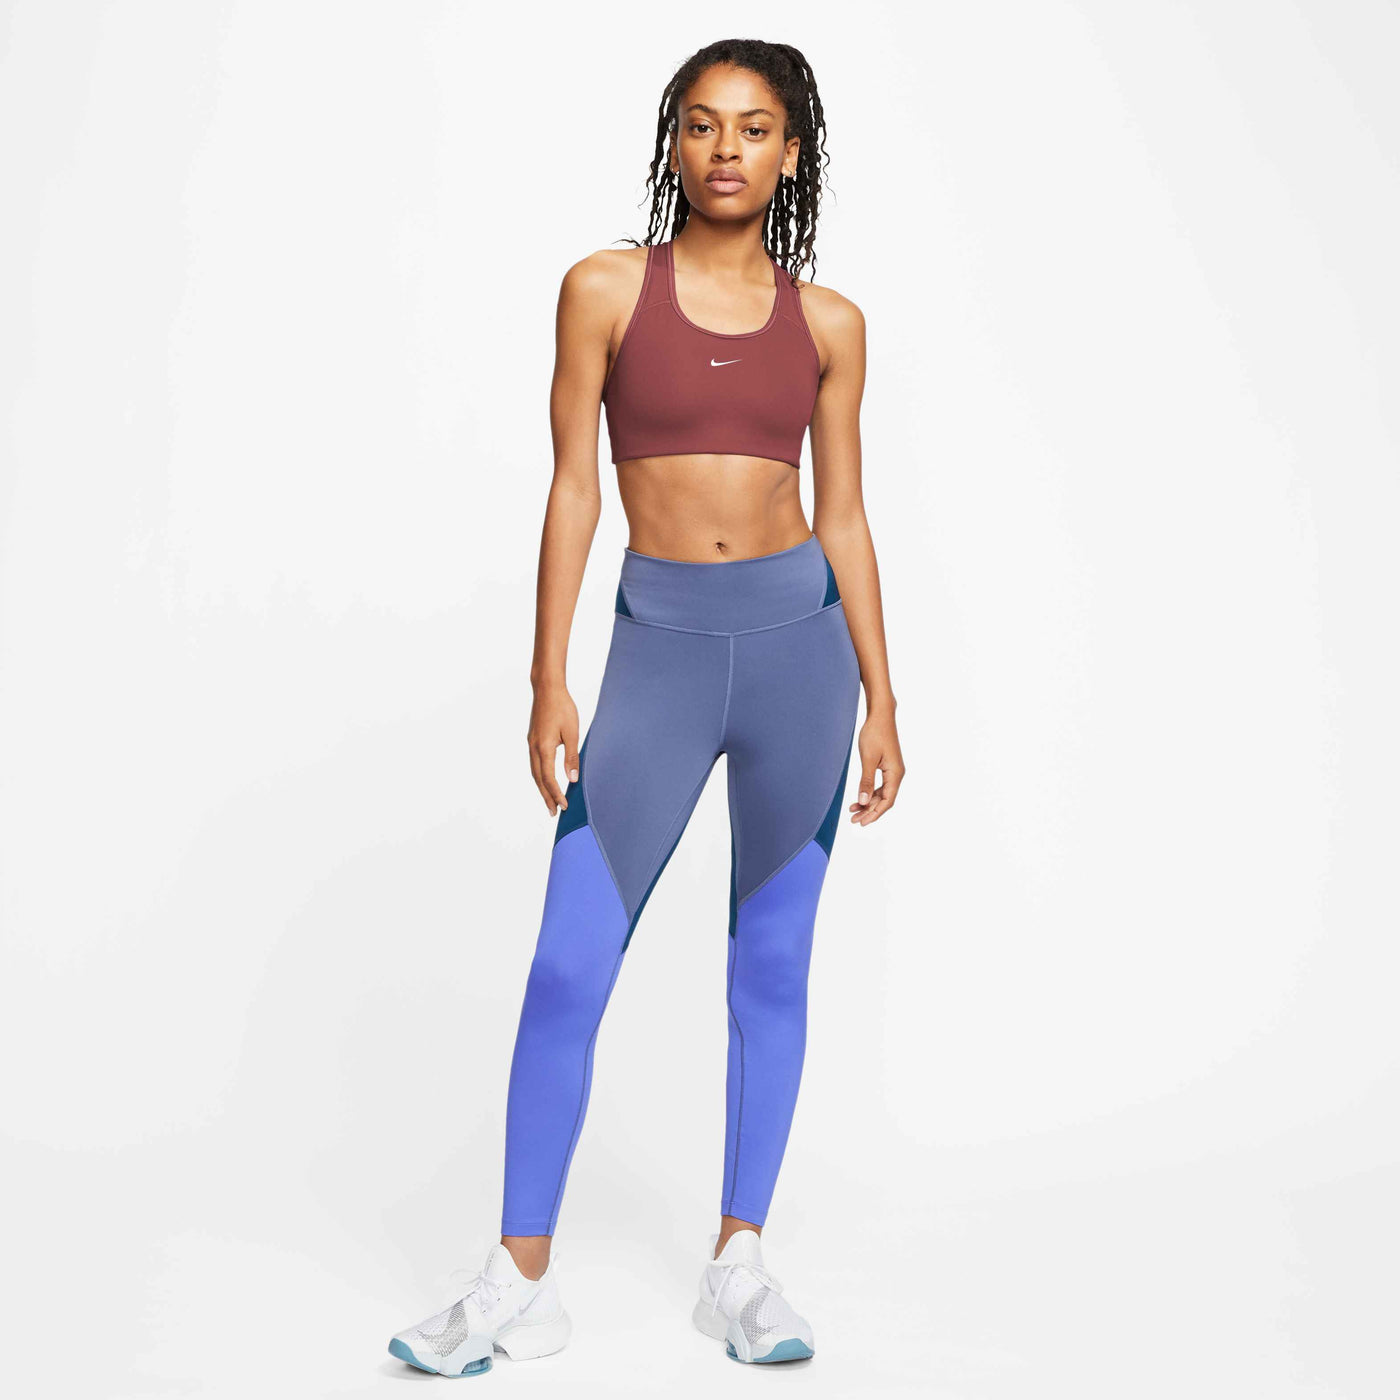 Nike Swoosh Bra (2 colours) X-Small only - Keep On Running